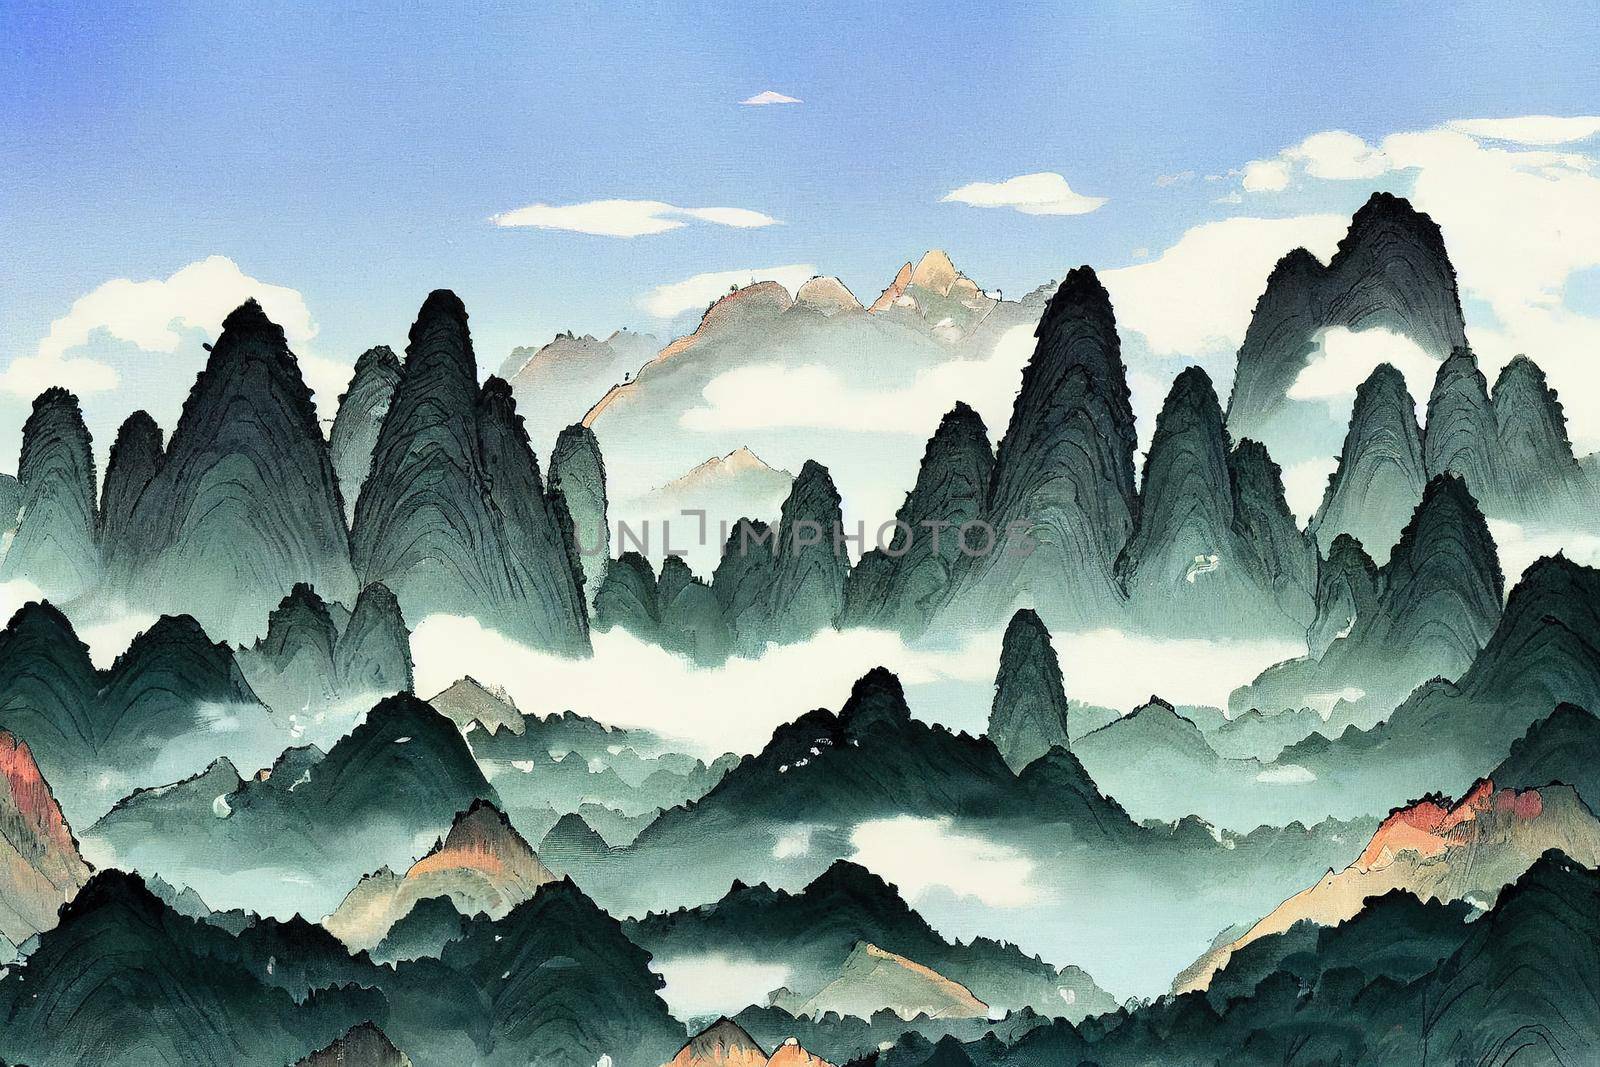 Chinese painting of mountains and rivers Clouds and pines High mountains of Huangshan anime style, cartoon style toon style v1